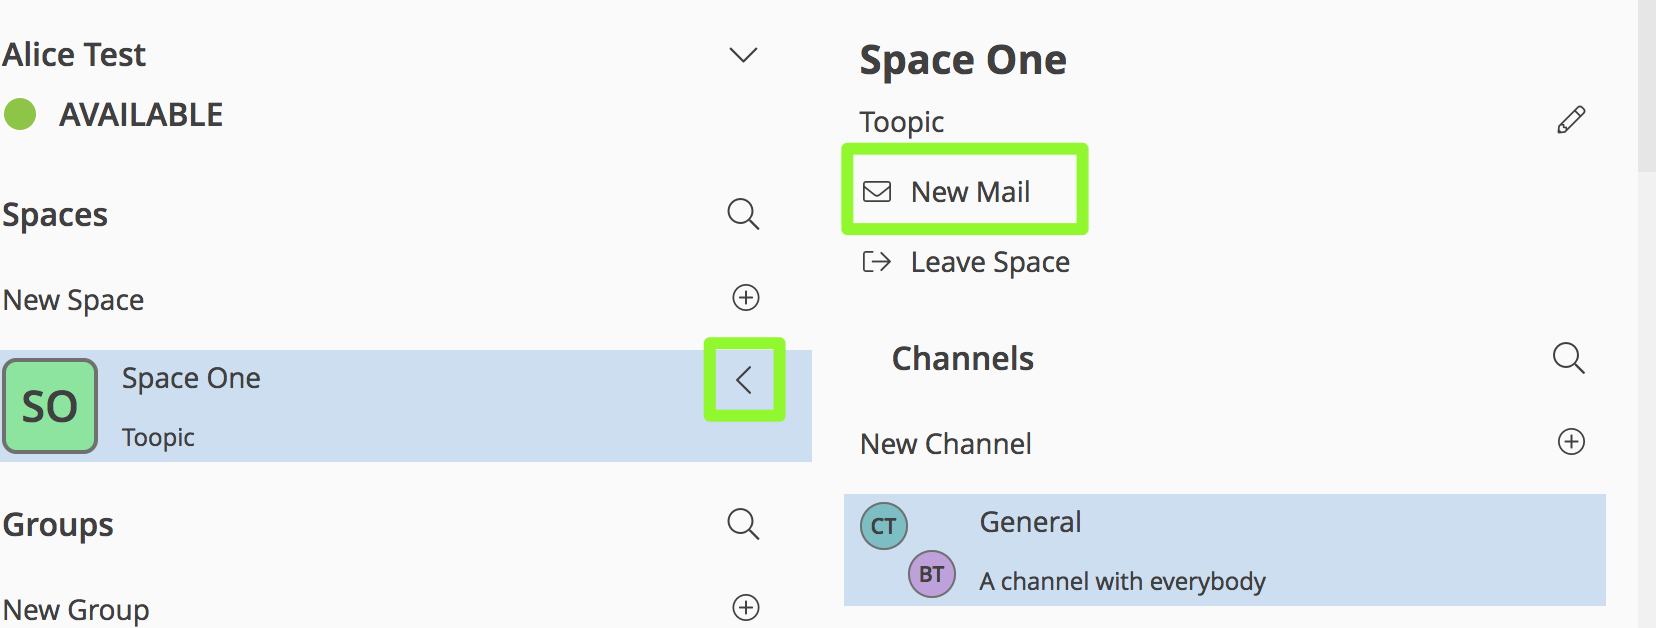 new_mail_space_1.png